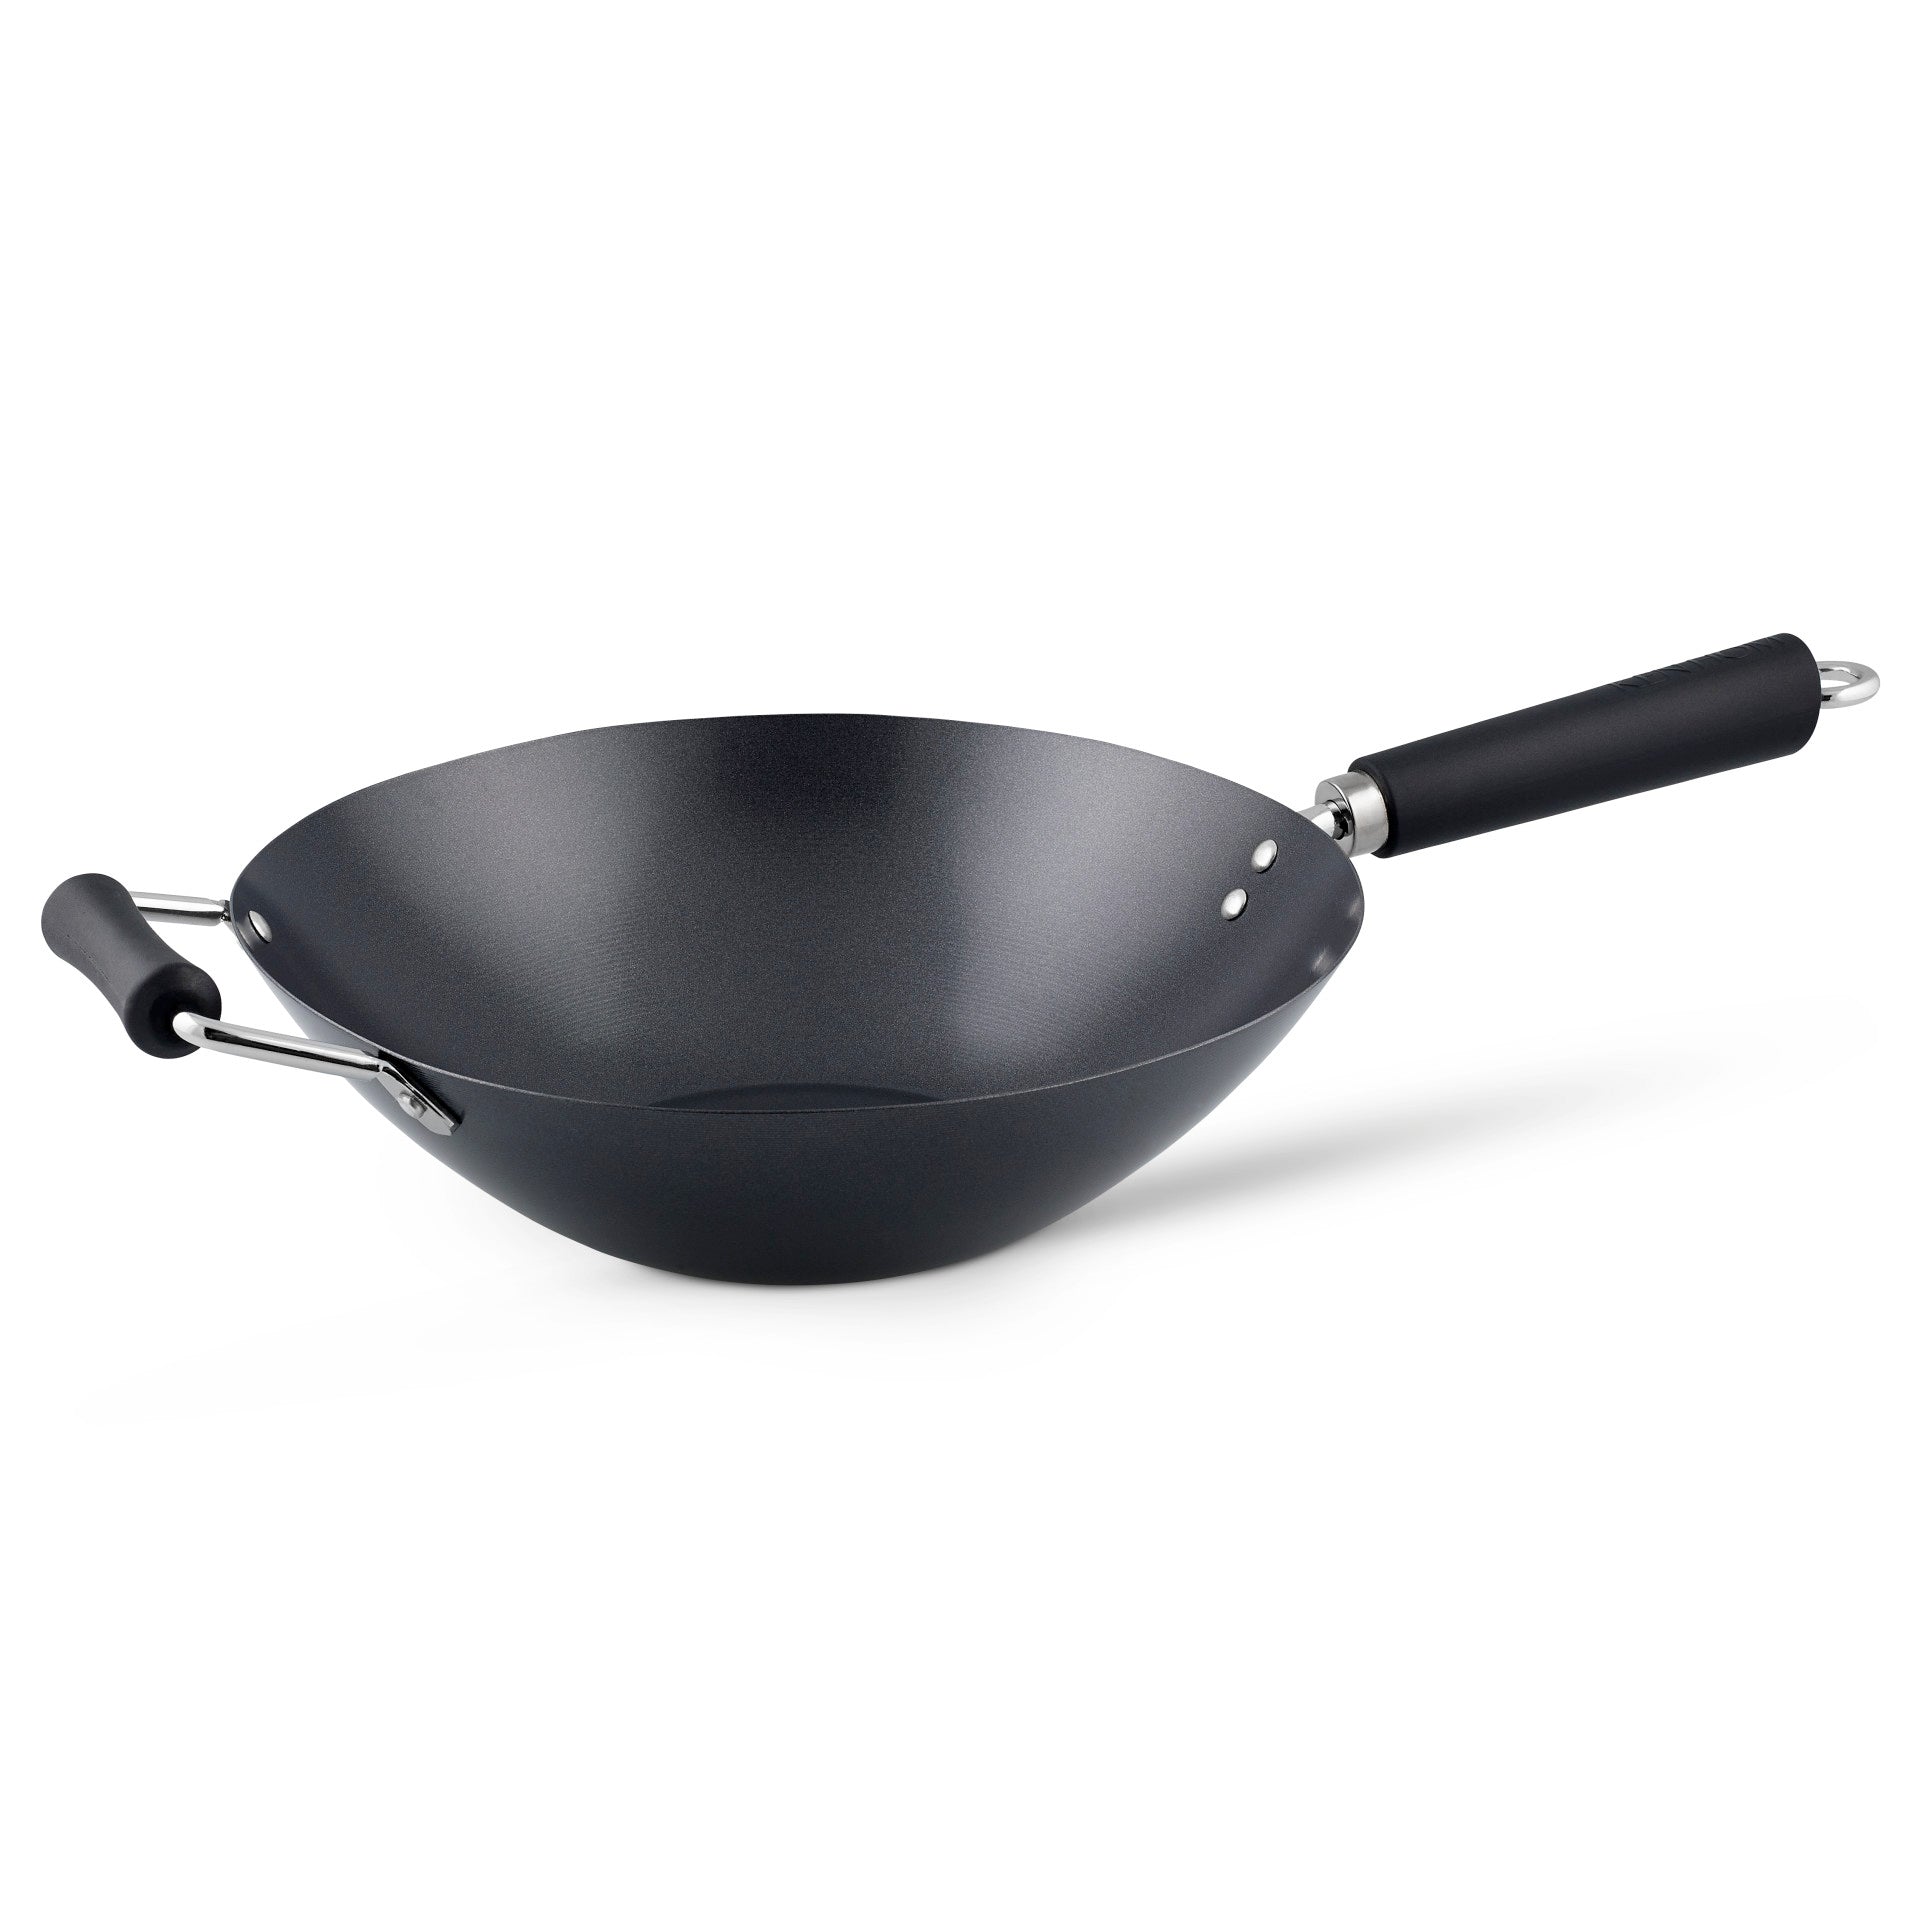 Excellence Wok 31cm, Cleaver, Steamer, Cooking Tools and Chopsticks